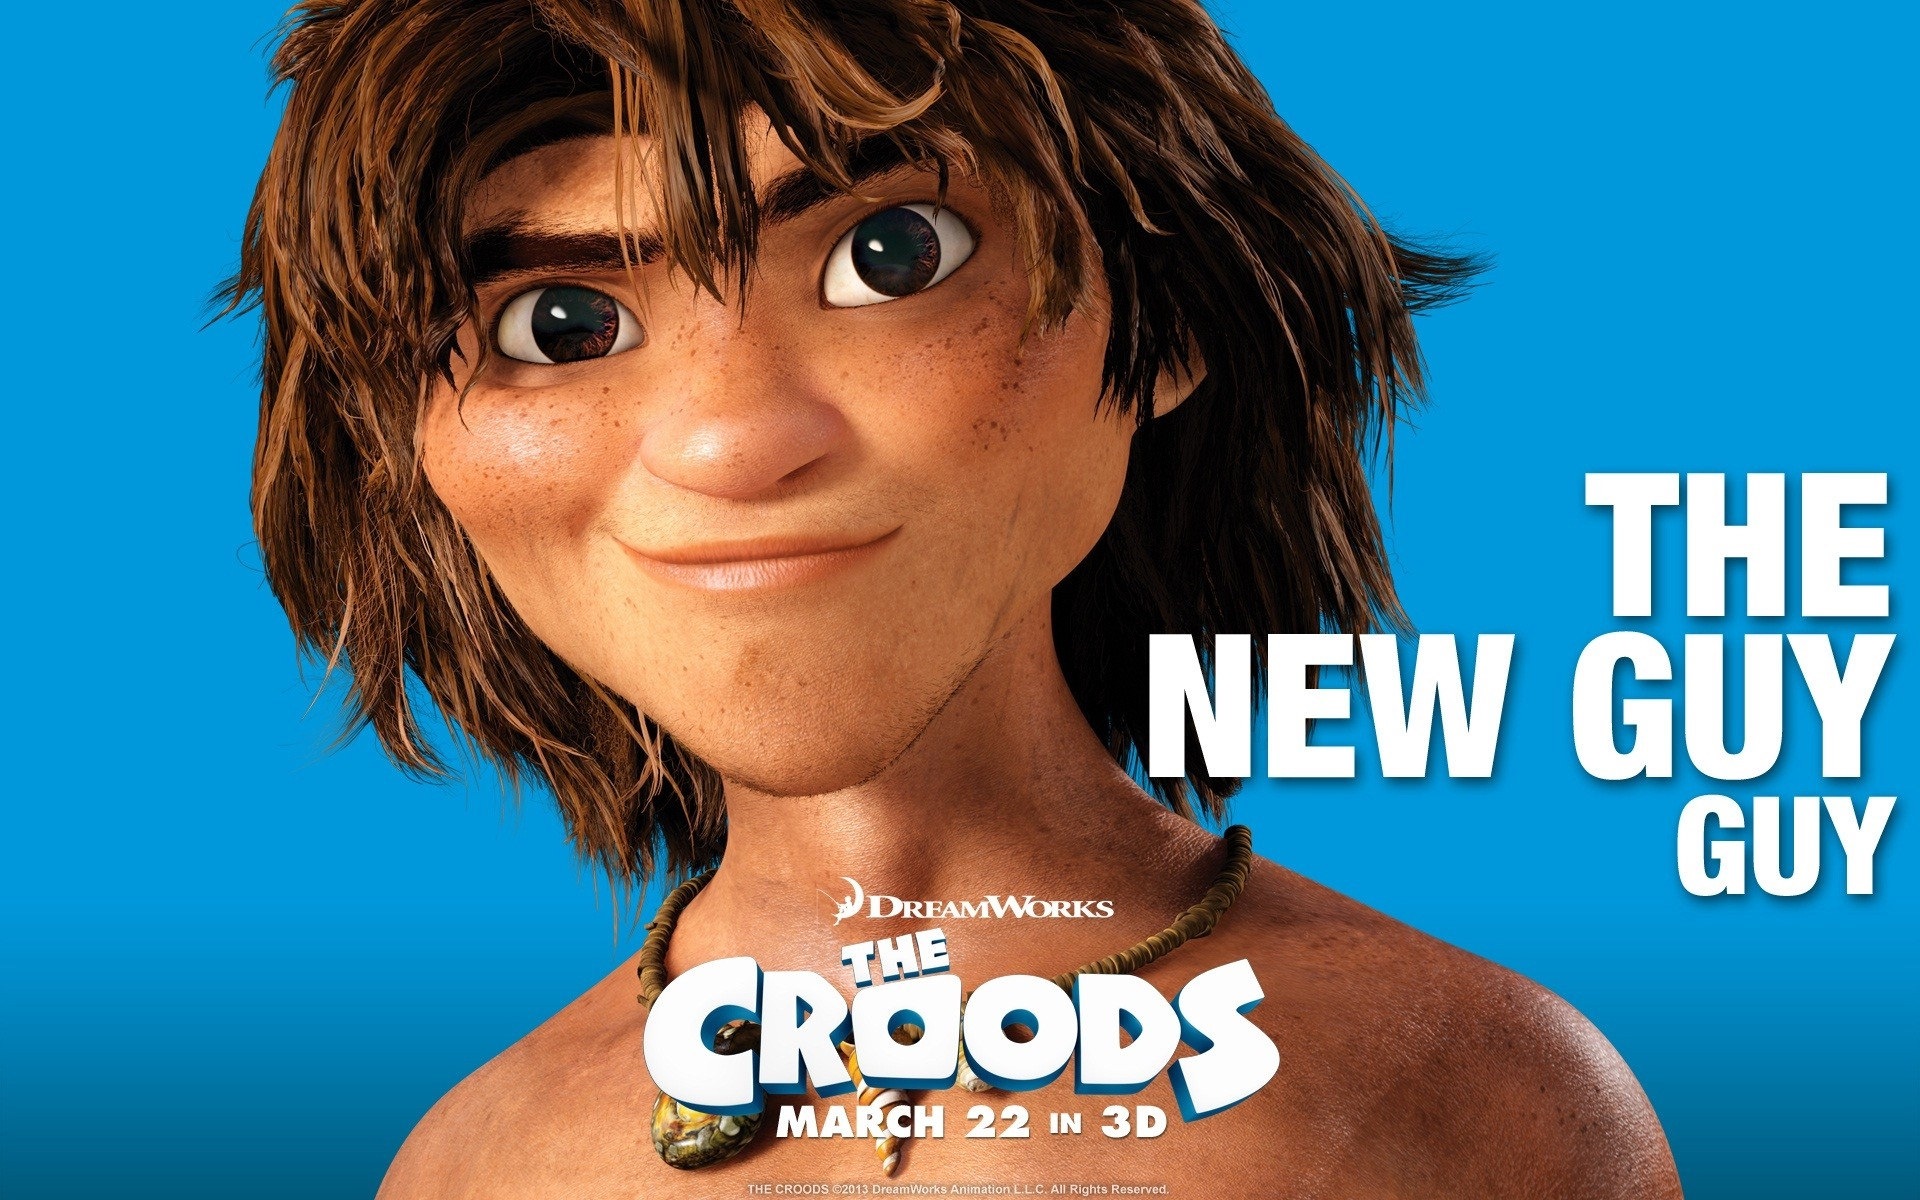 V Croods HD Movie Wallpapers #8 - 1920x1200